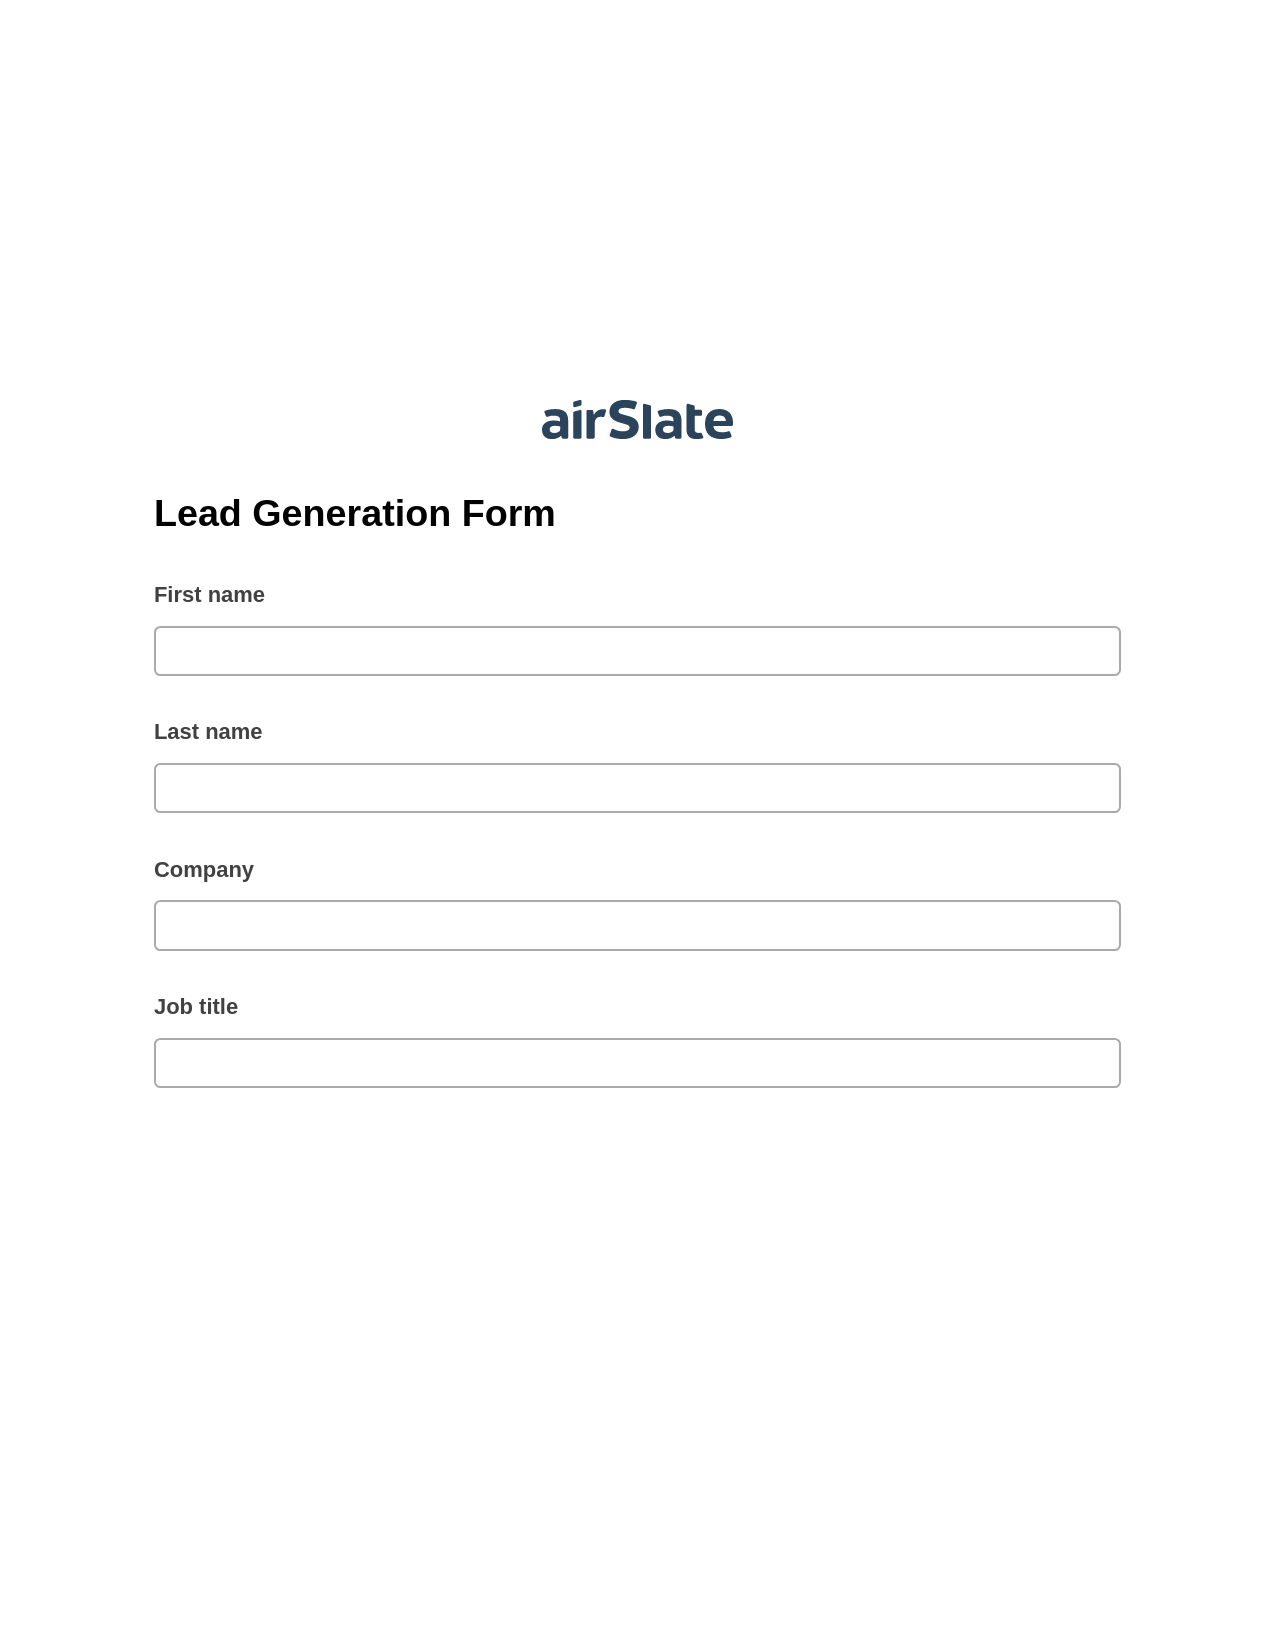 Lead Generation Form Pre-fill from Salesforce Records Bot, Send a Slate with Roles Bot, Export to Salesforce Record Bot